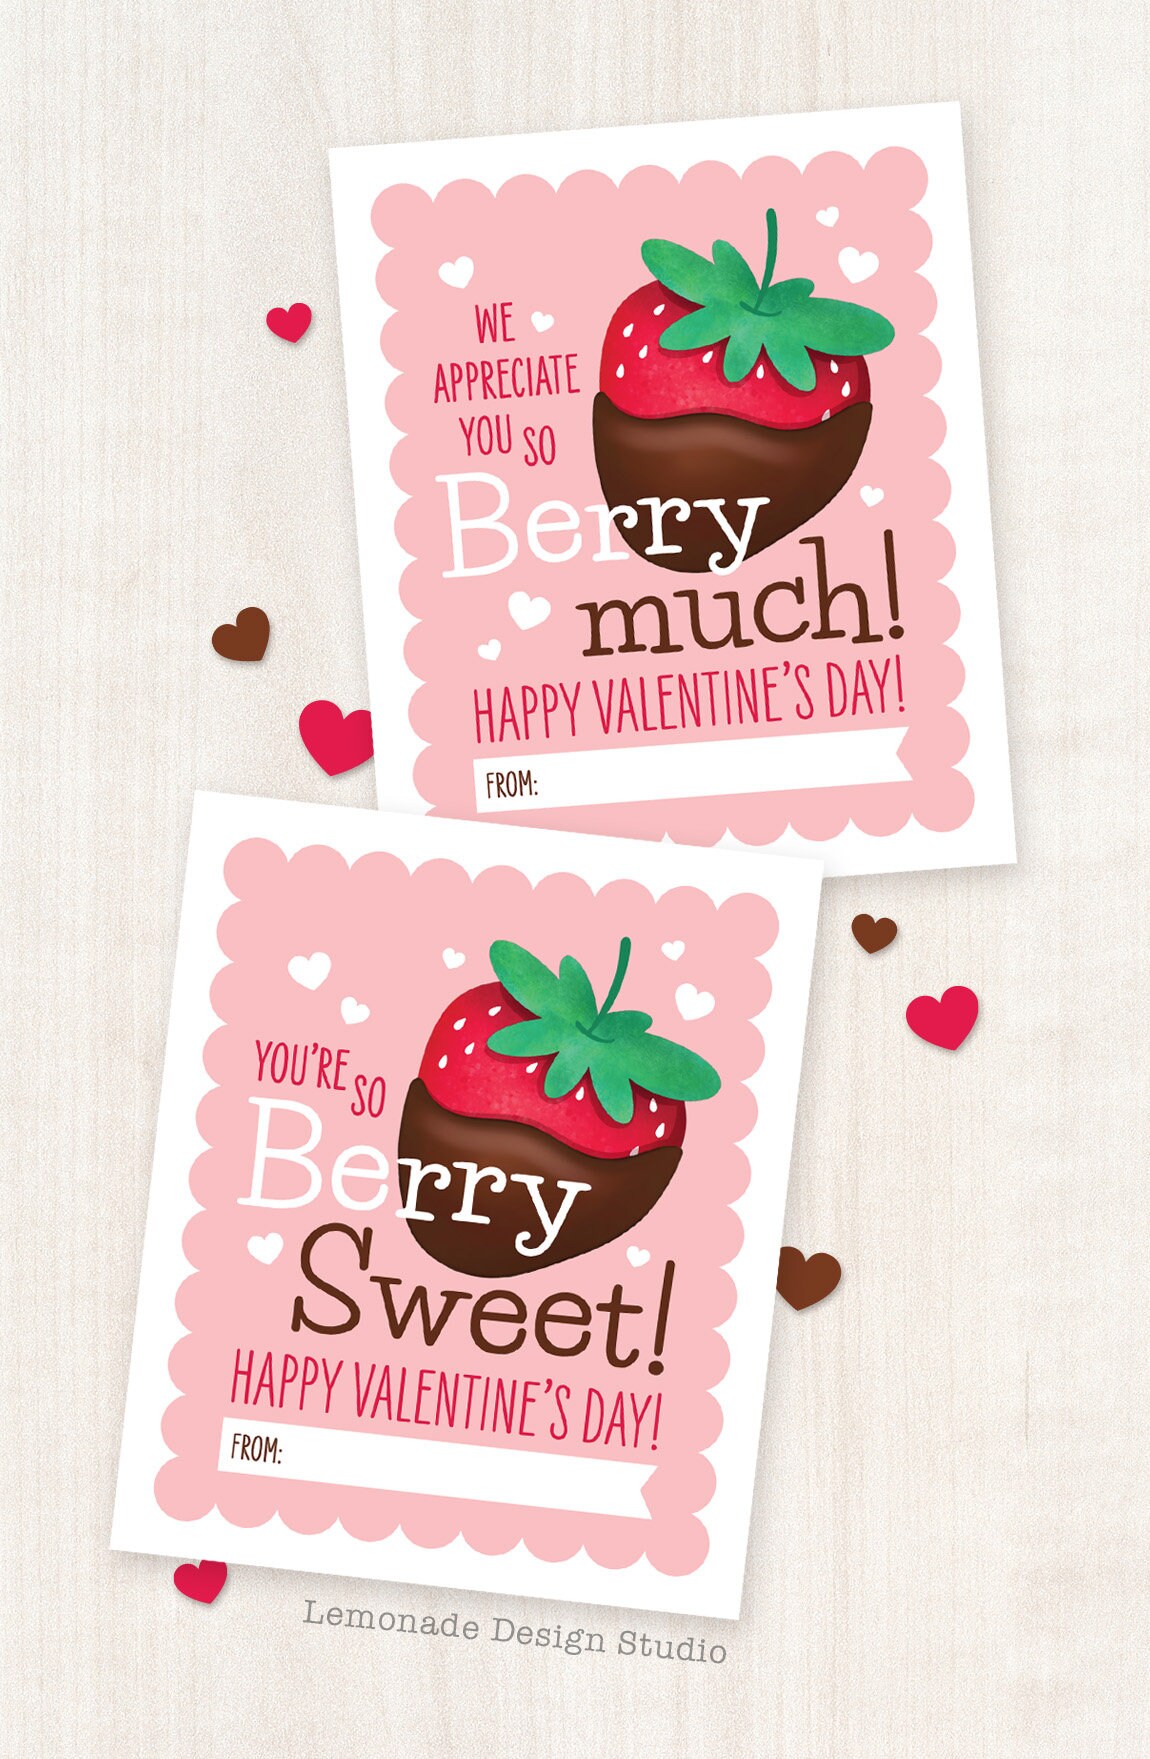 Strawberry Smencils® with Valentine's Day Cards (52 ct.) (Incentive &  Prize)